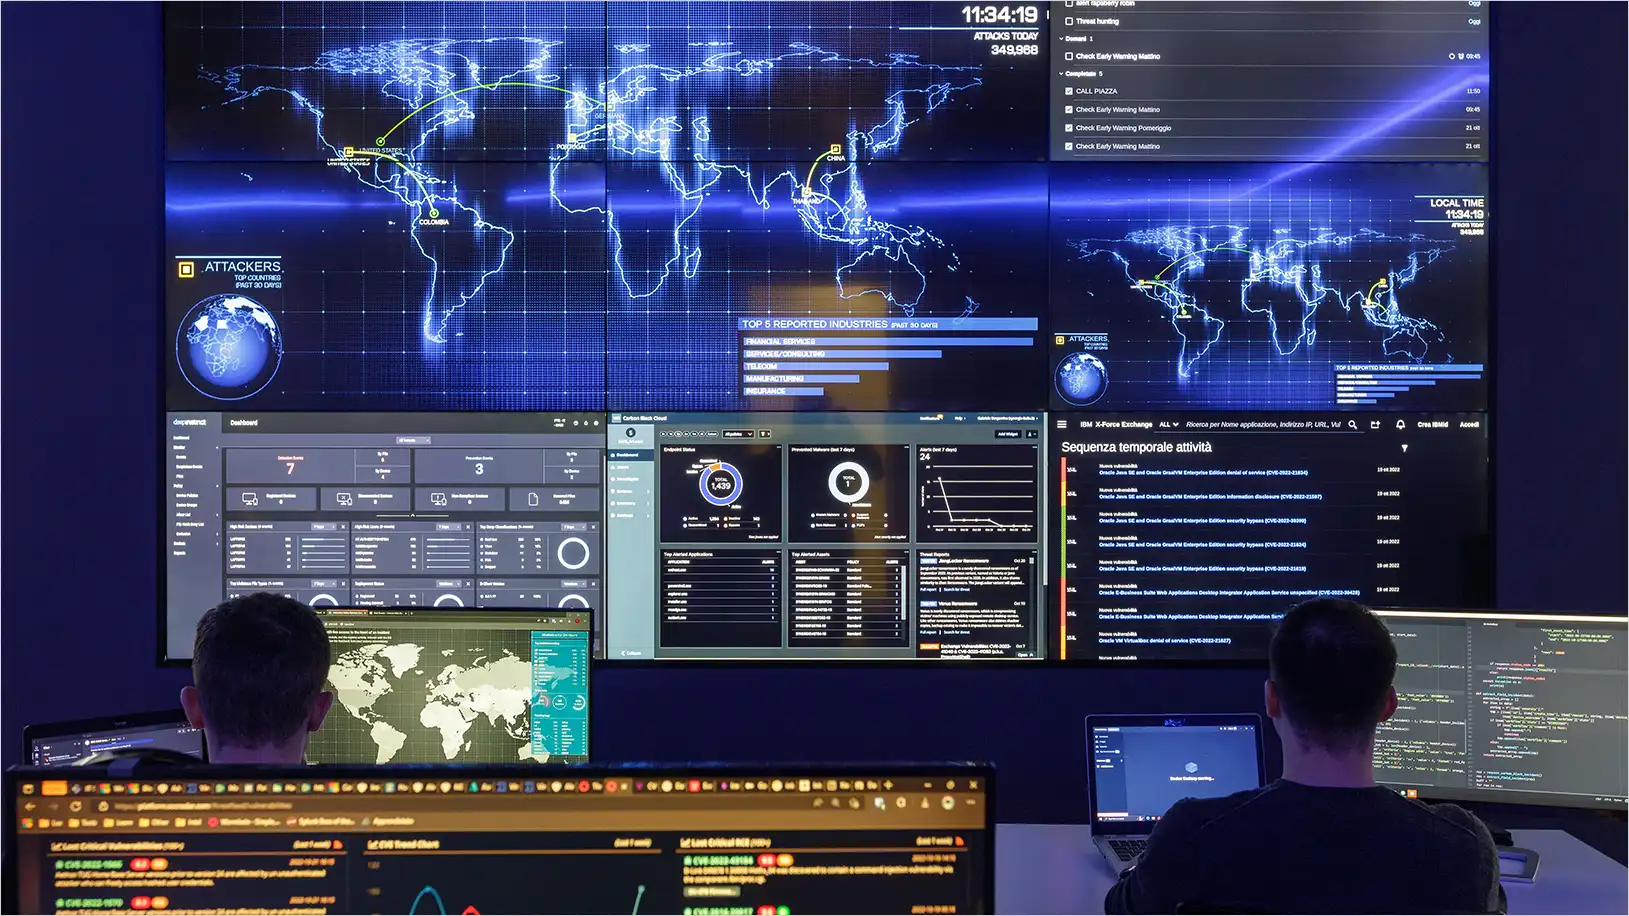 Cyber Security Operations Center at Nais